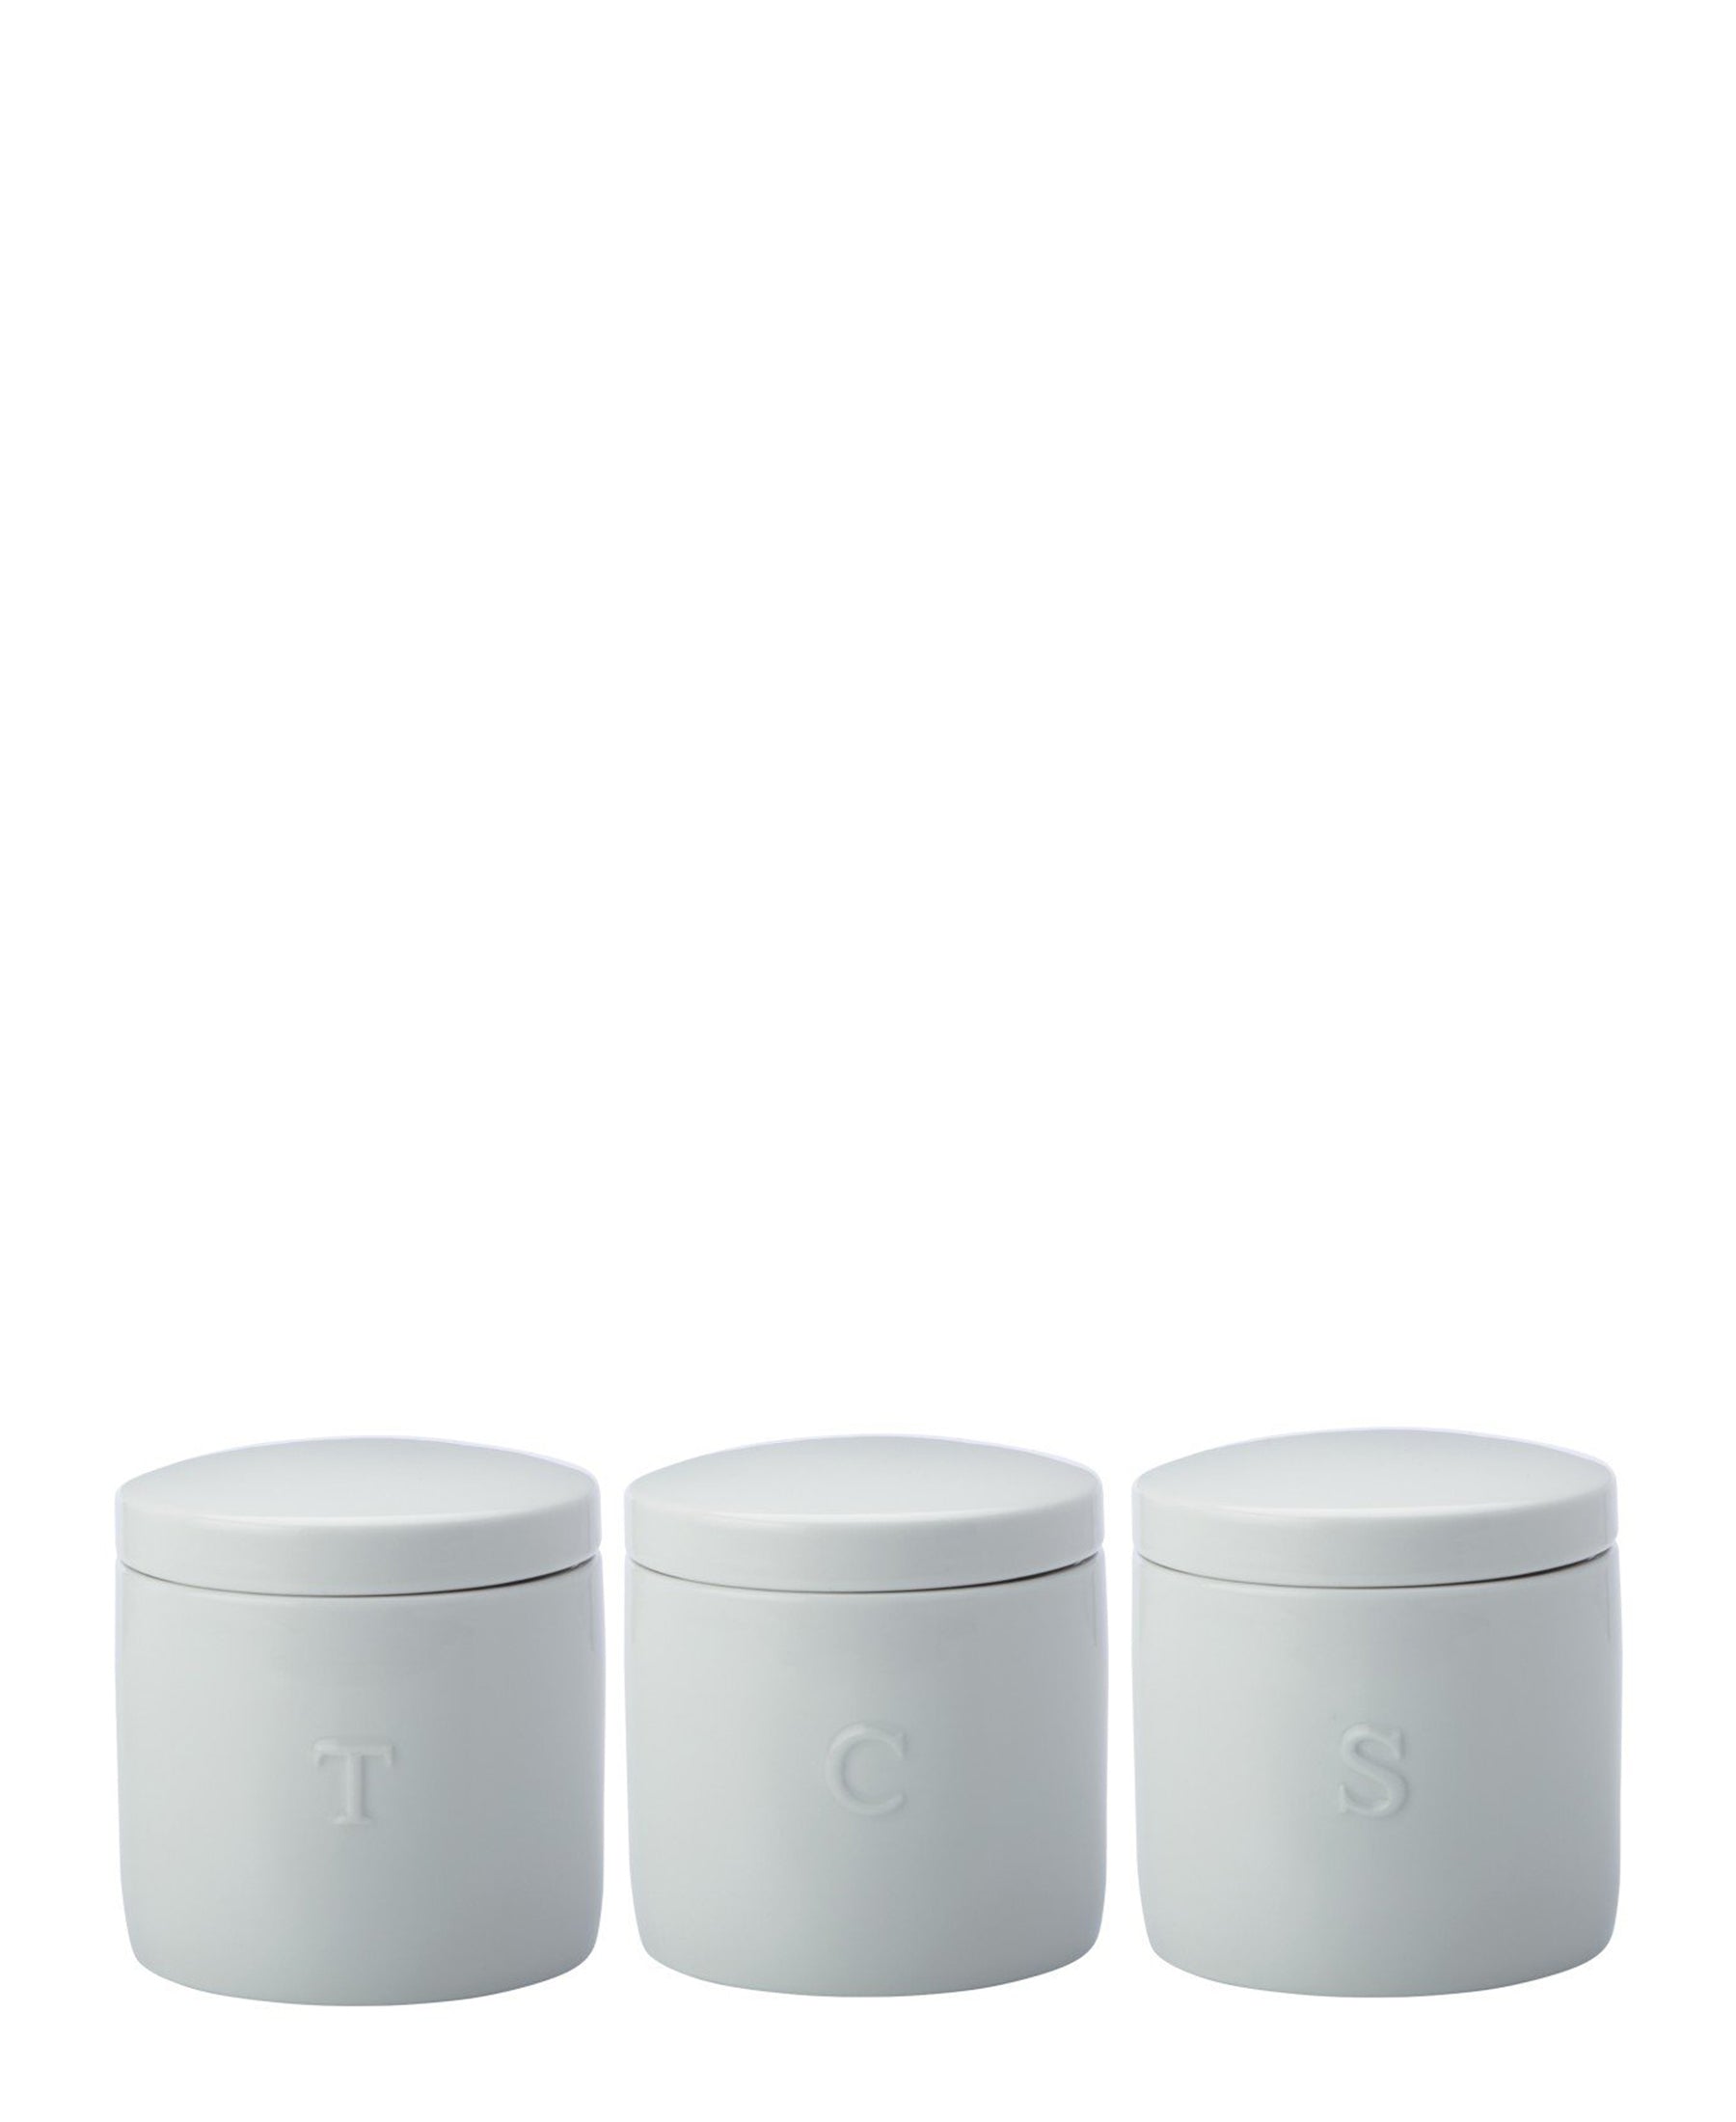 Epicurious Canister 600ML Set Of 3 White Gift Boxed